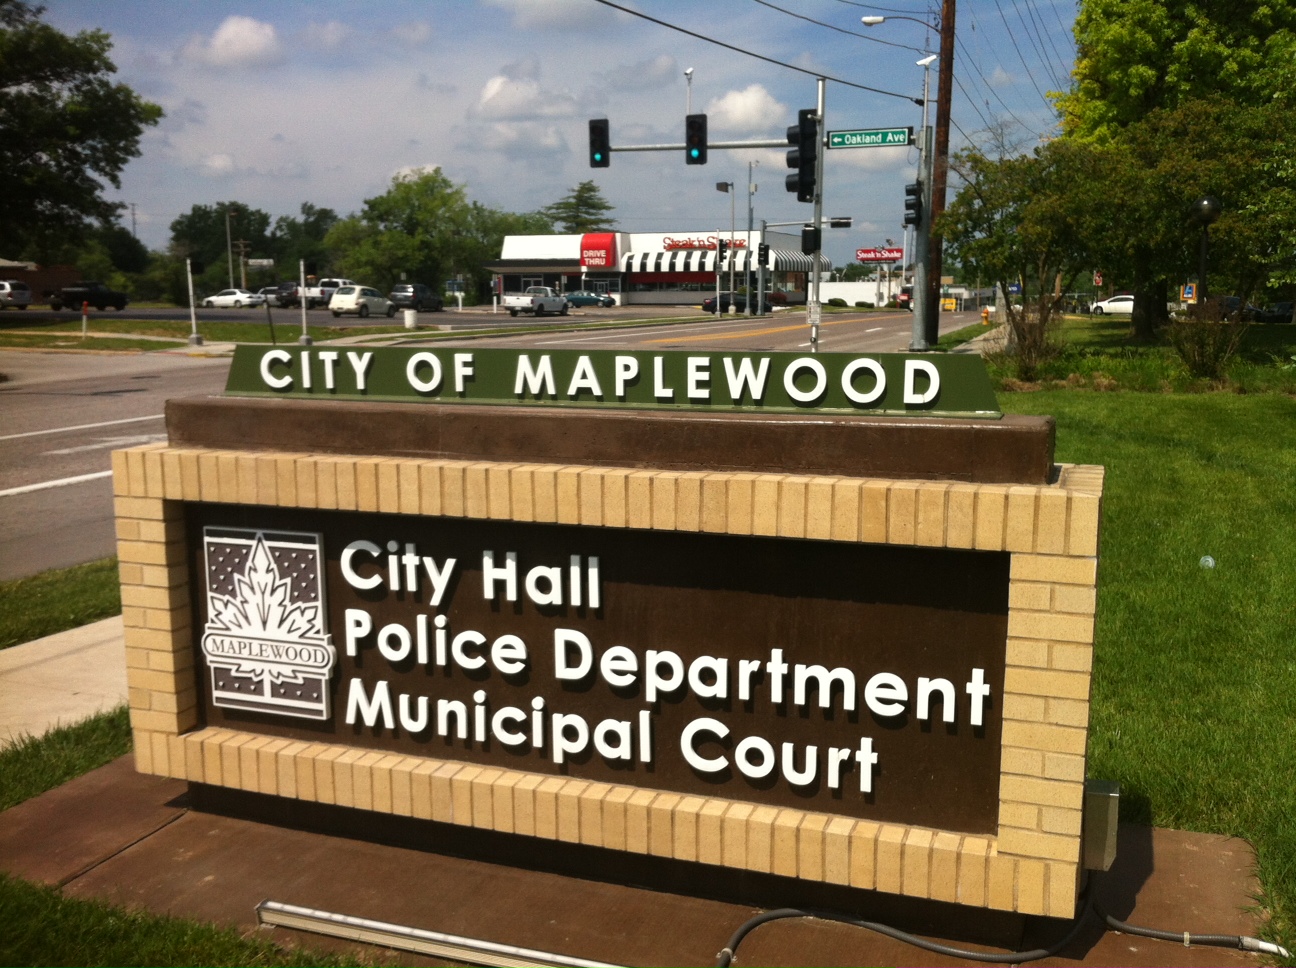 New York Times: Maplewood part of legal system that led to Ferguson